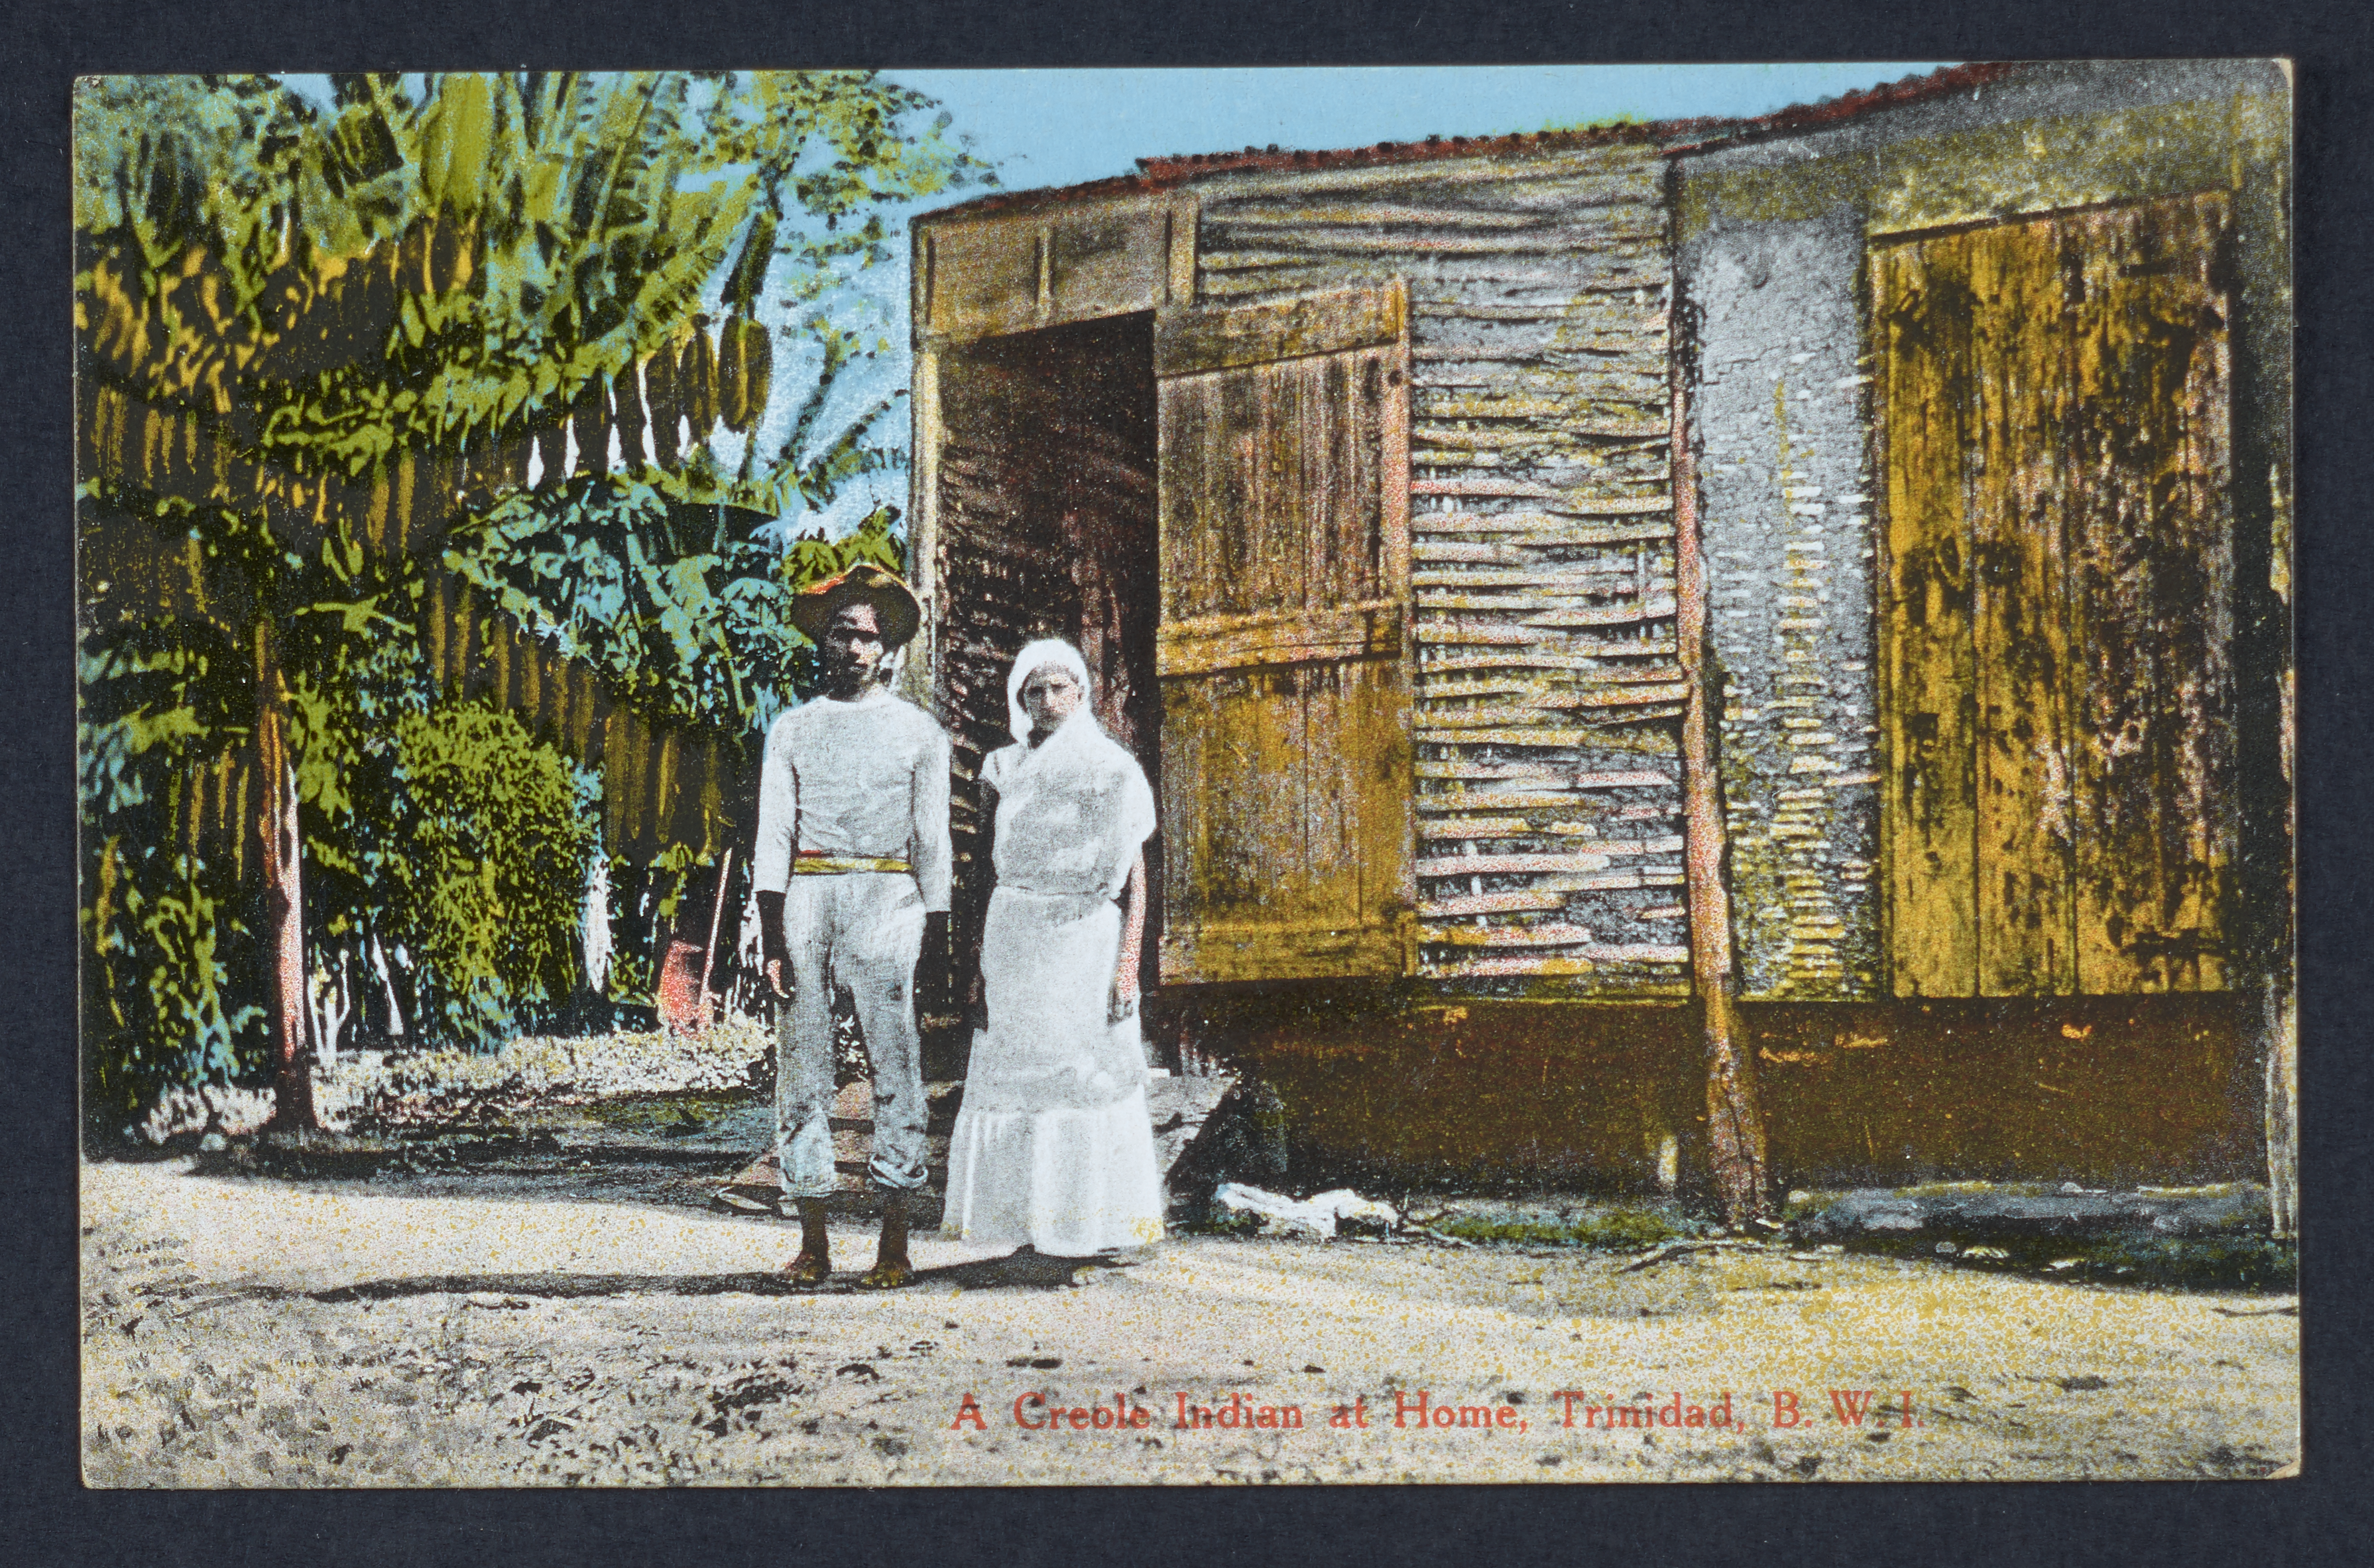 A Creole couple stand in front of their house.